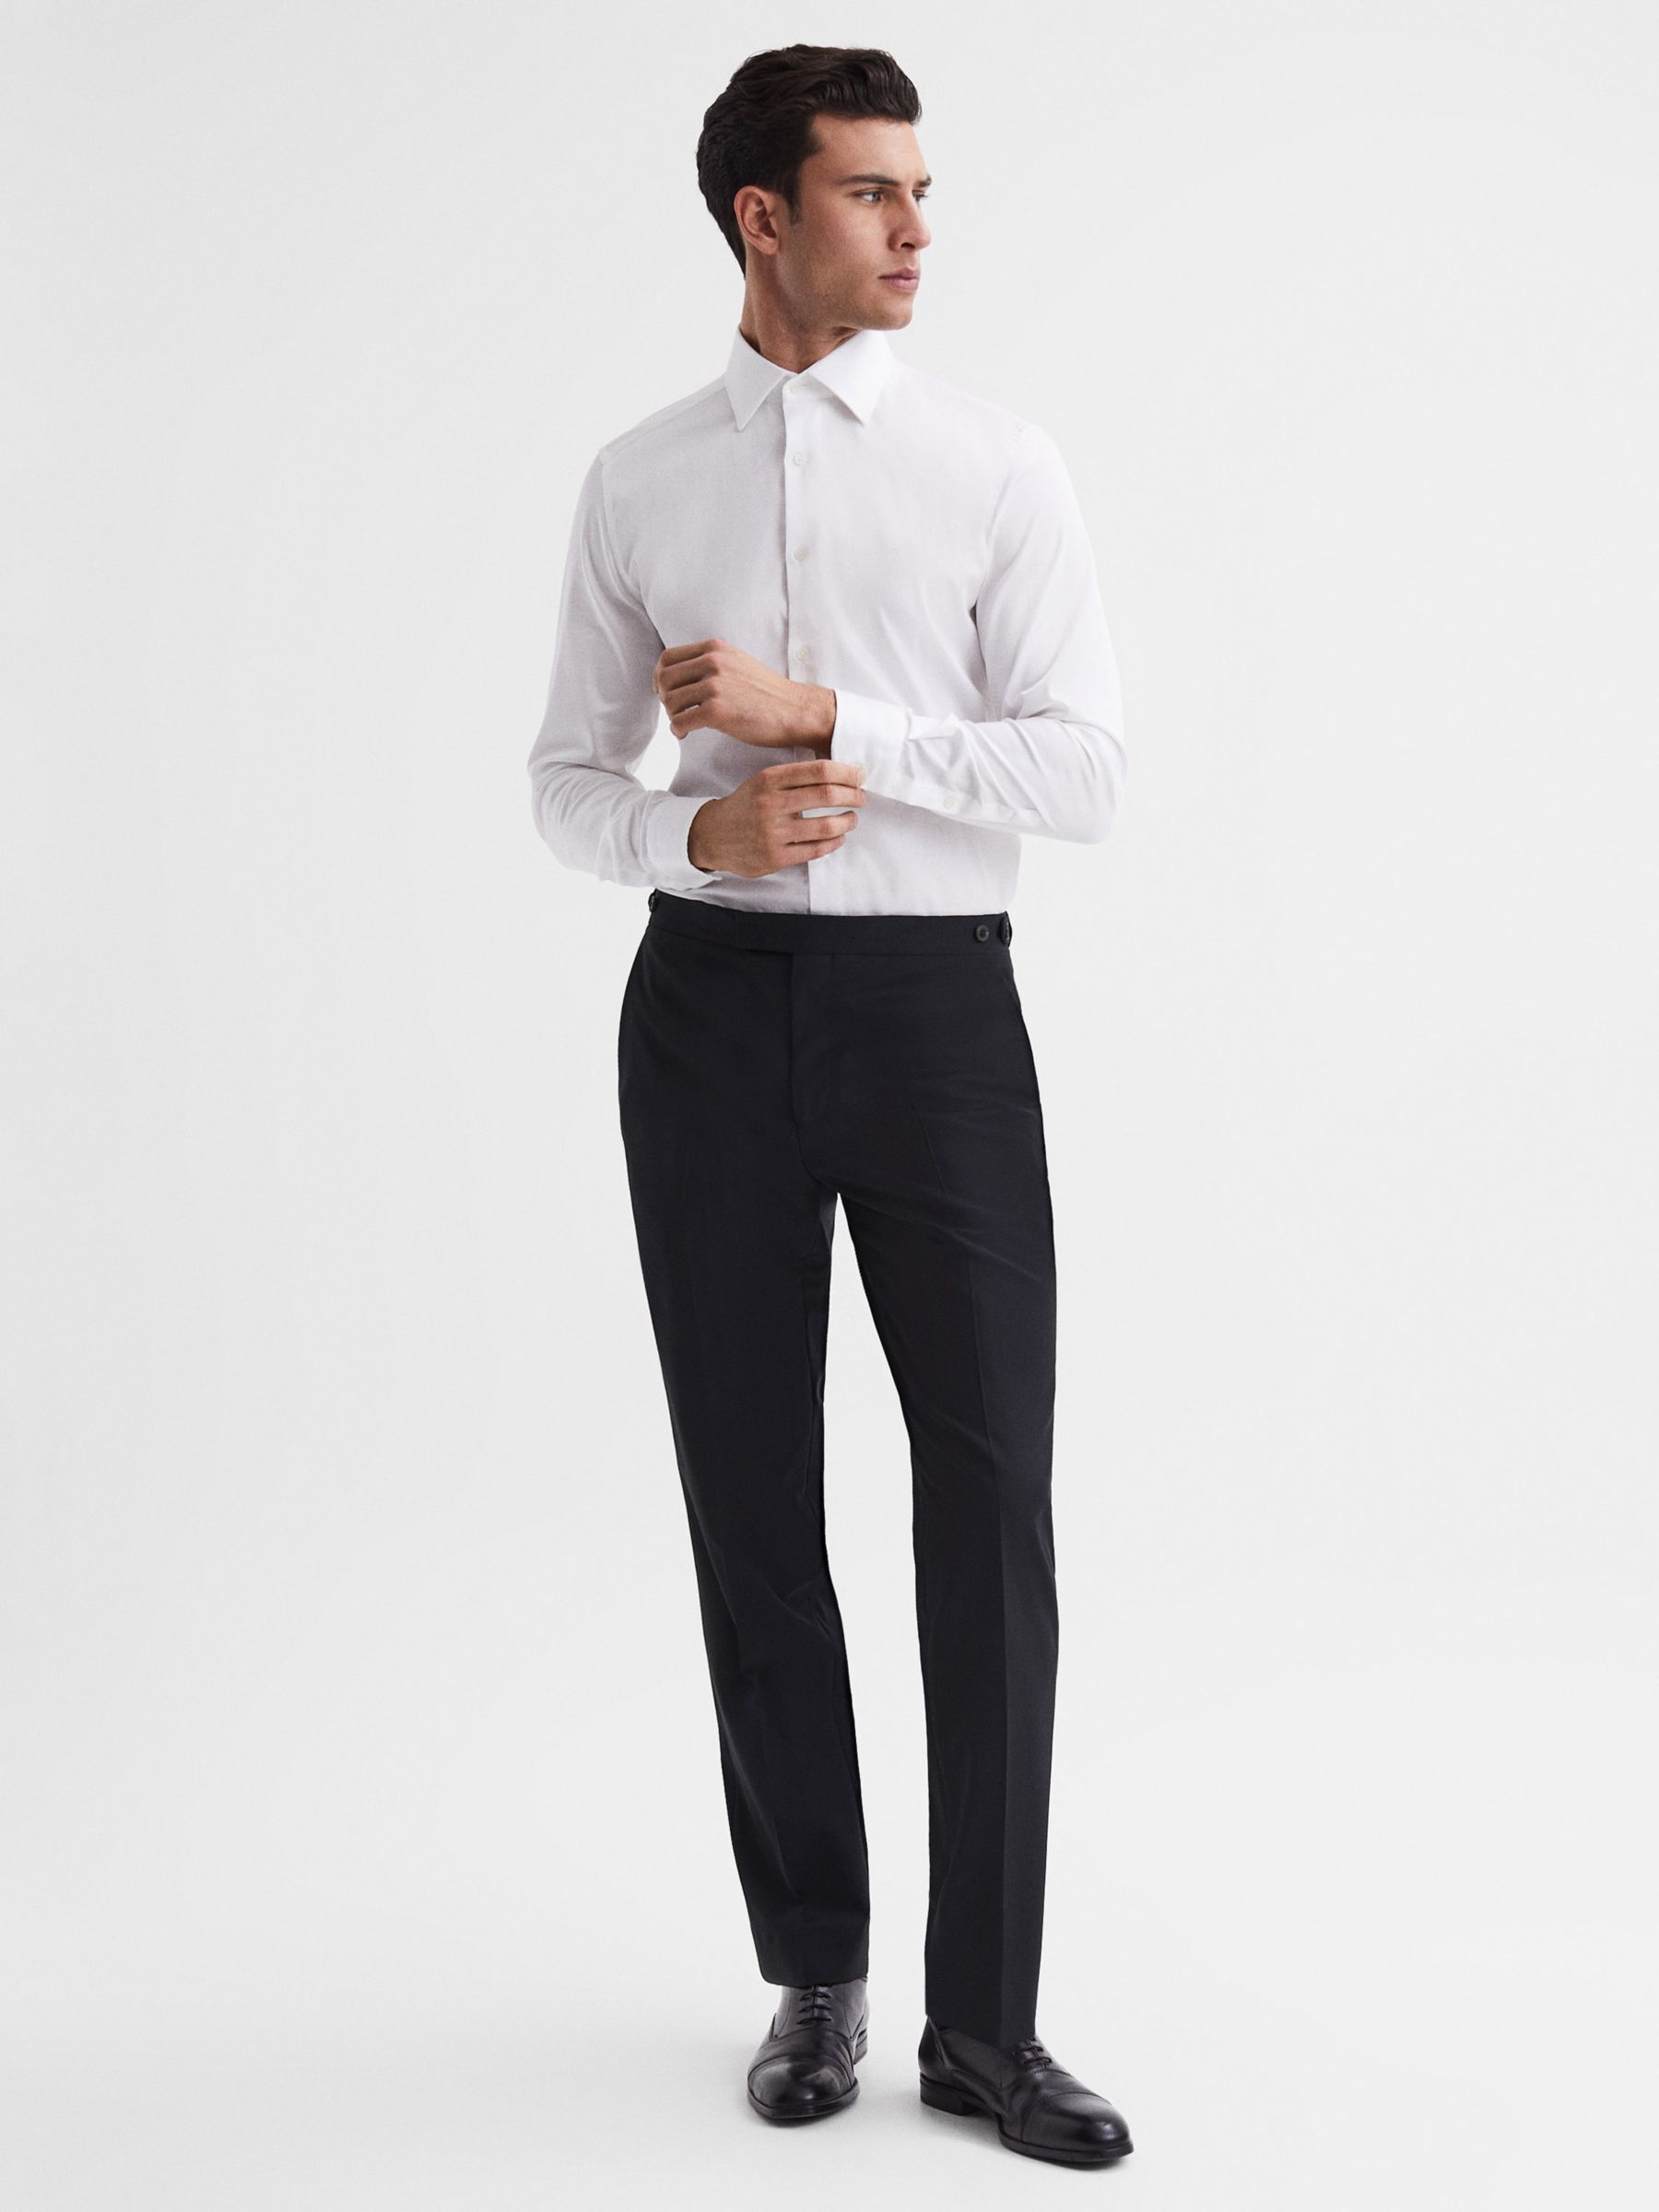 Buy Reiss Hope Modern Fit Wool Blend Travel Suit Trousers Online at johnlewis.com